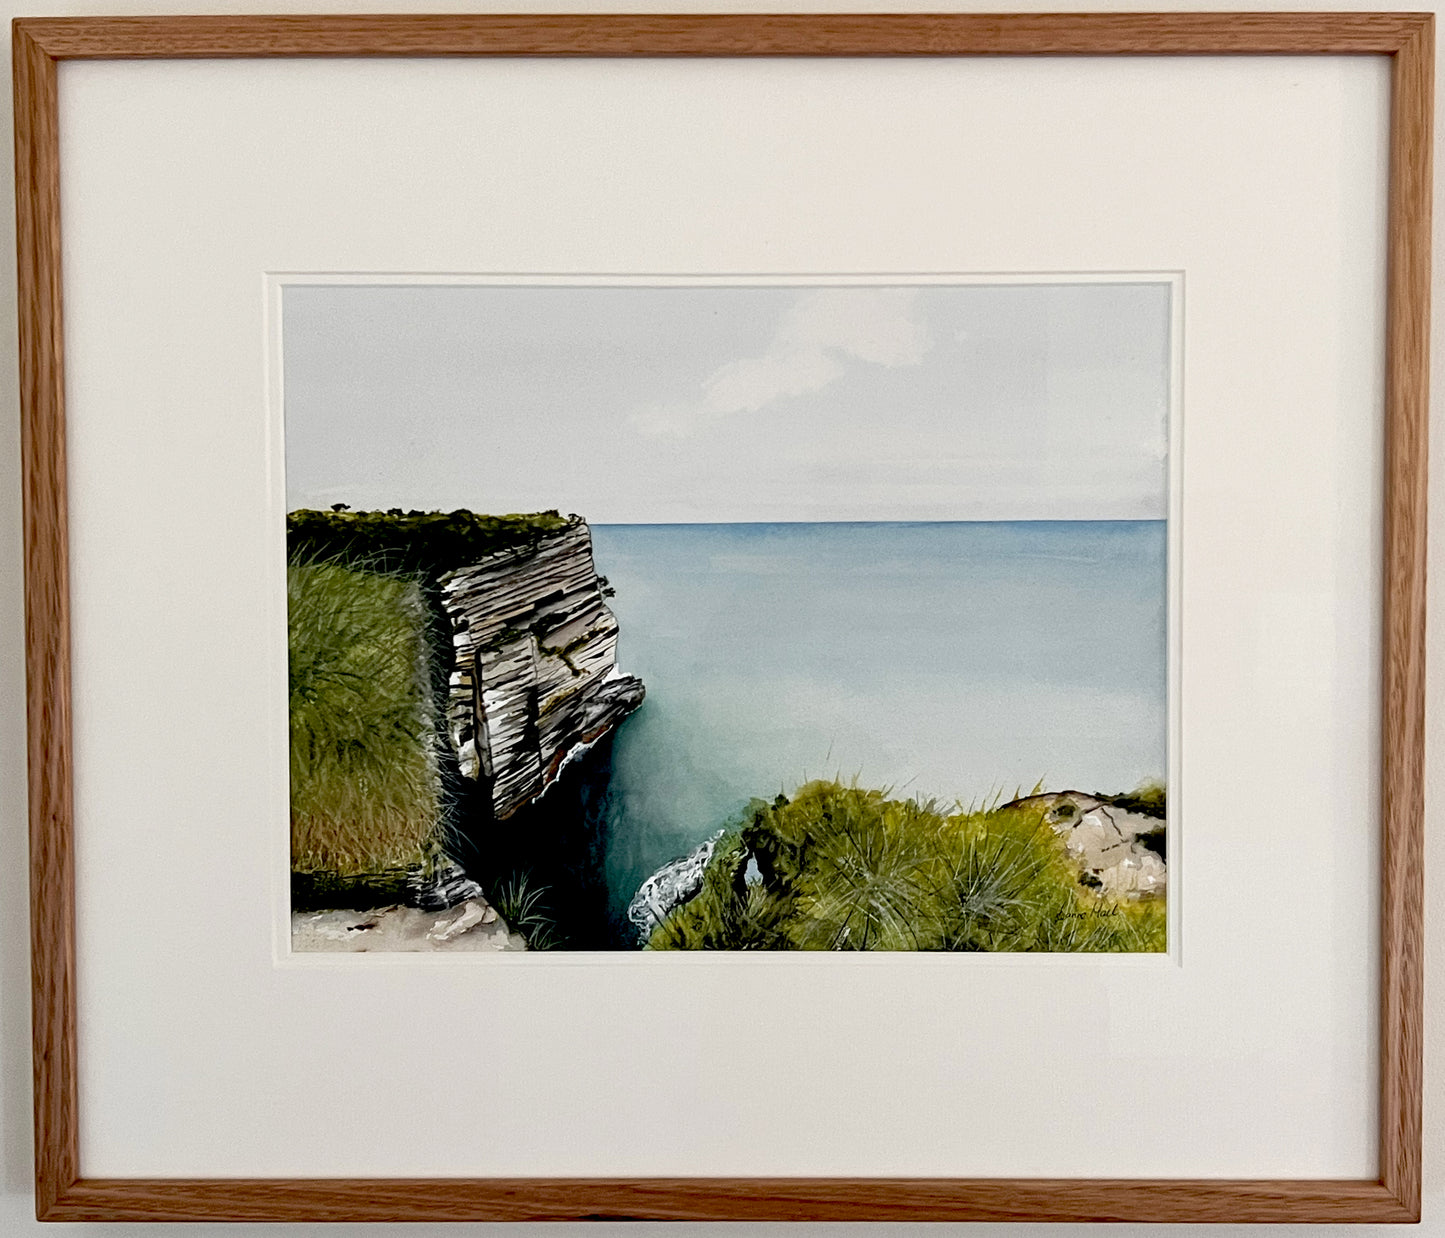 Sea Caves - framed watercolour painting by Leanne Hall